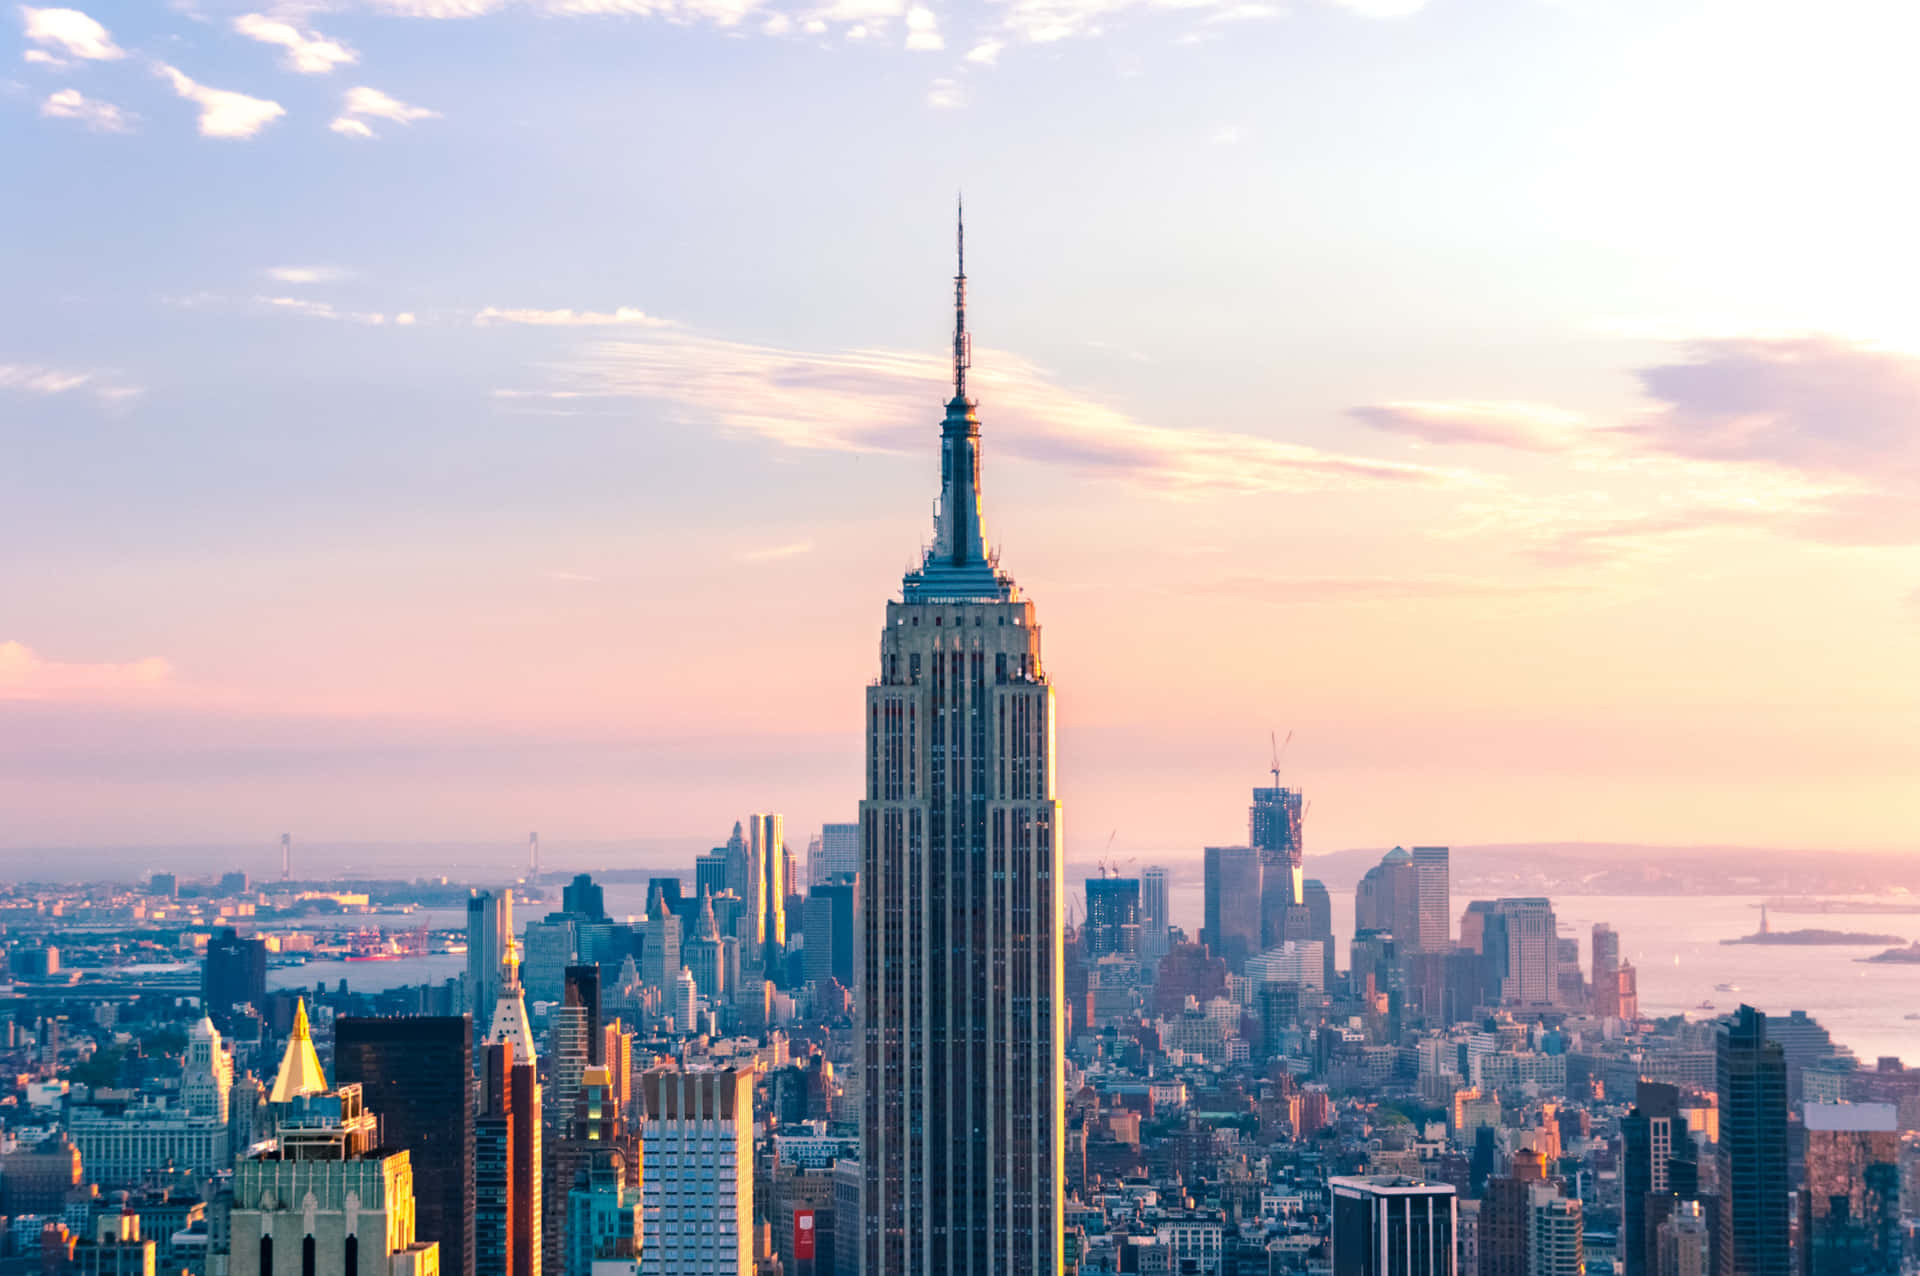 The Iconic Empire State Building in New York City